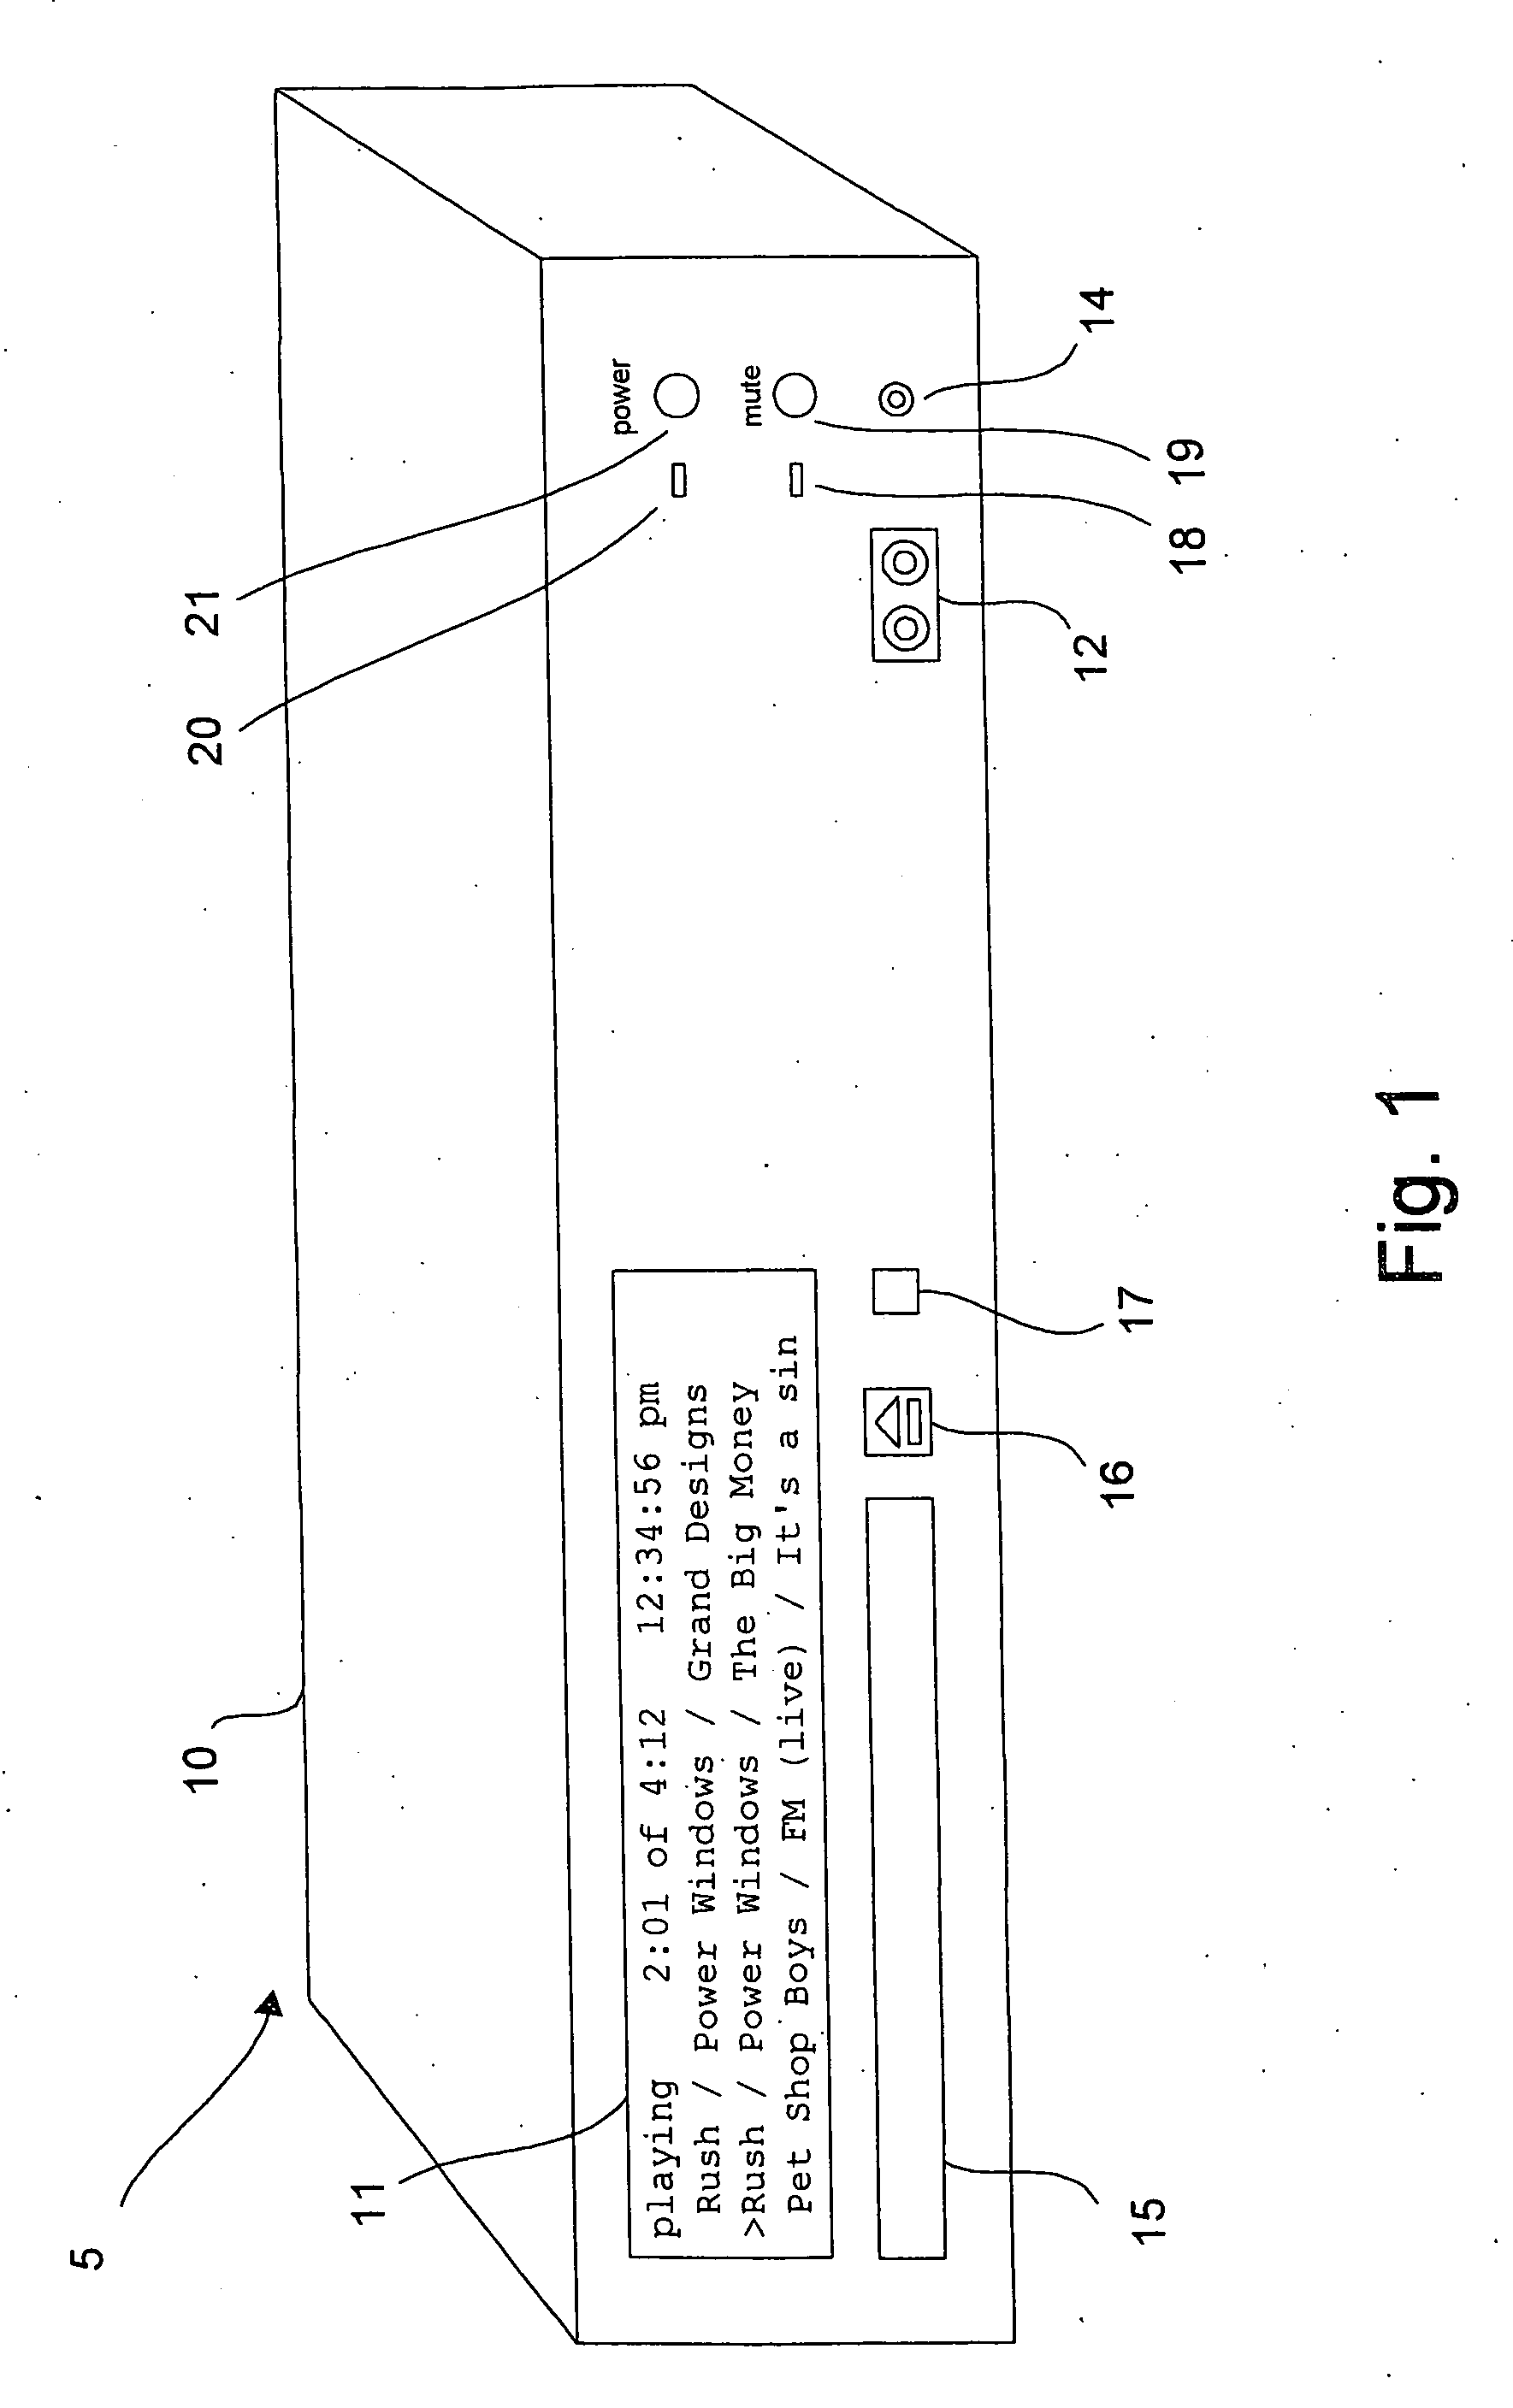 Audio entertainment system for storing and playing audio information